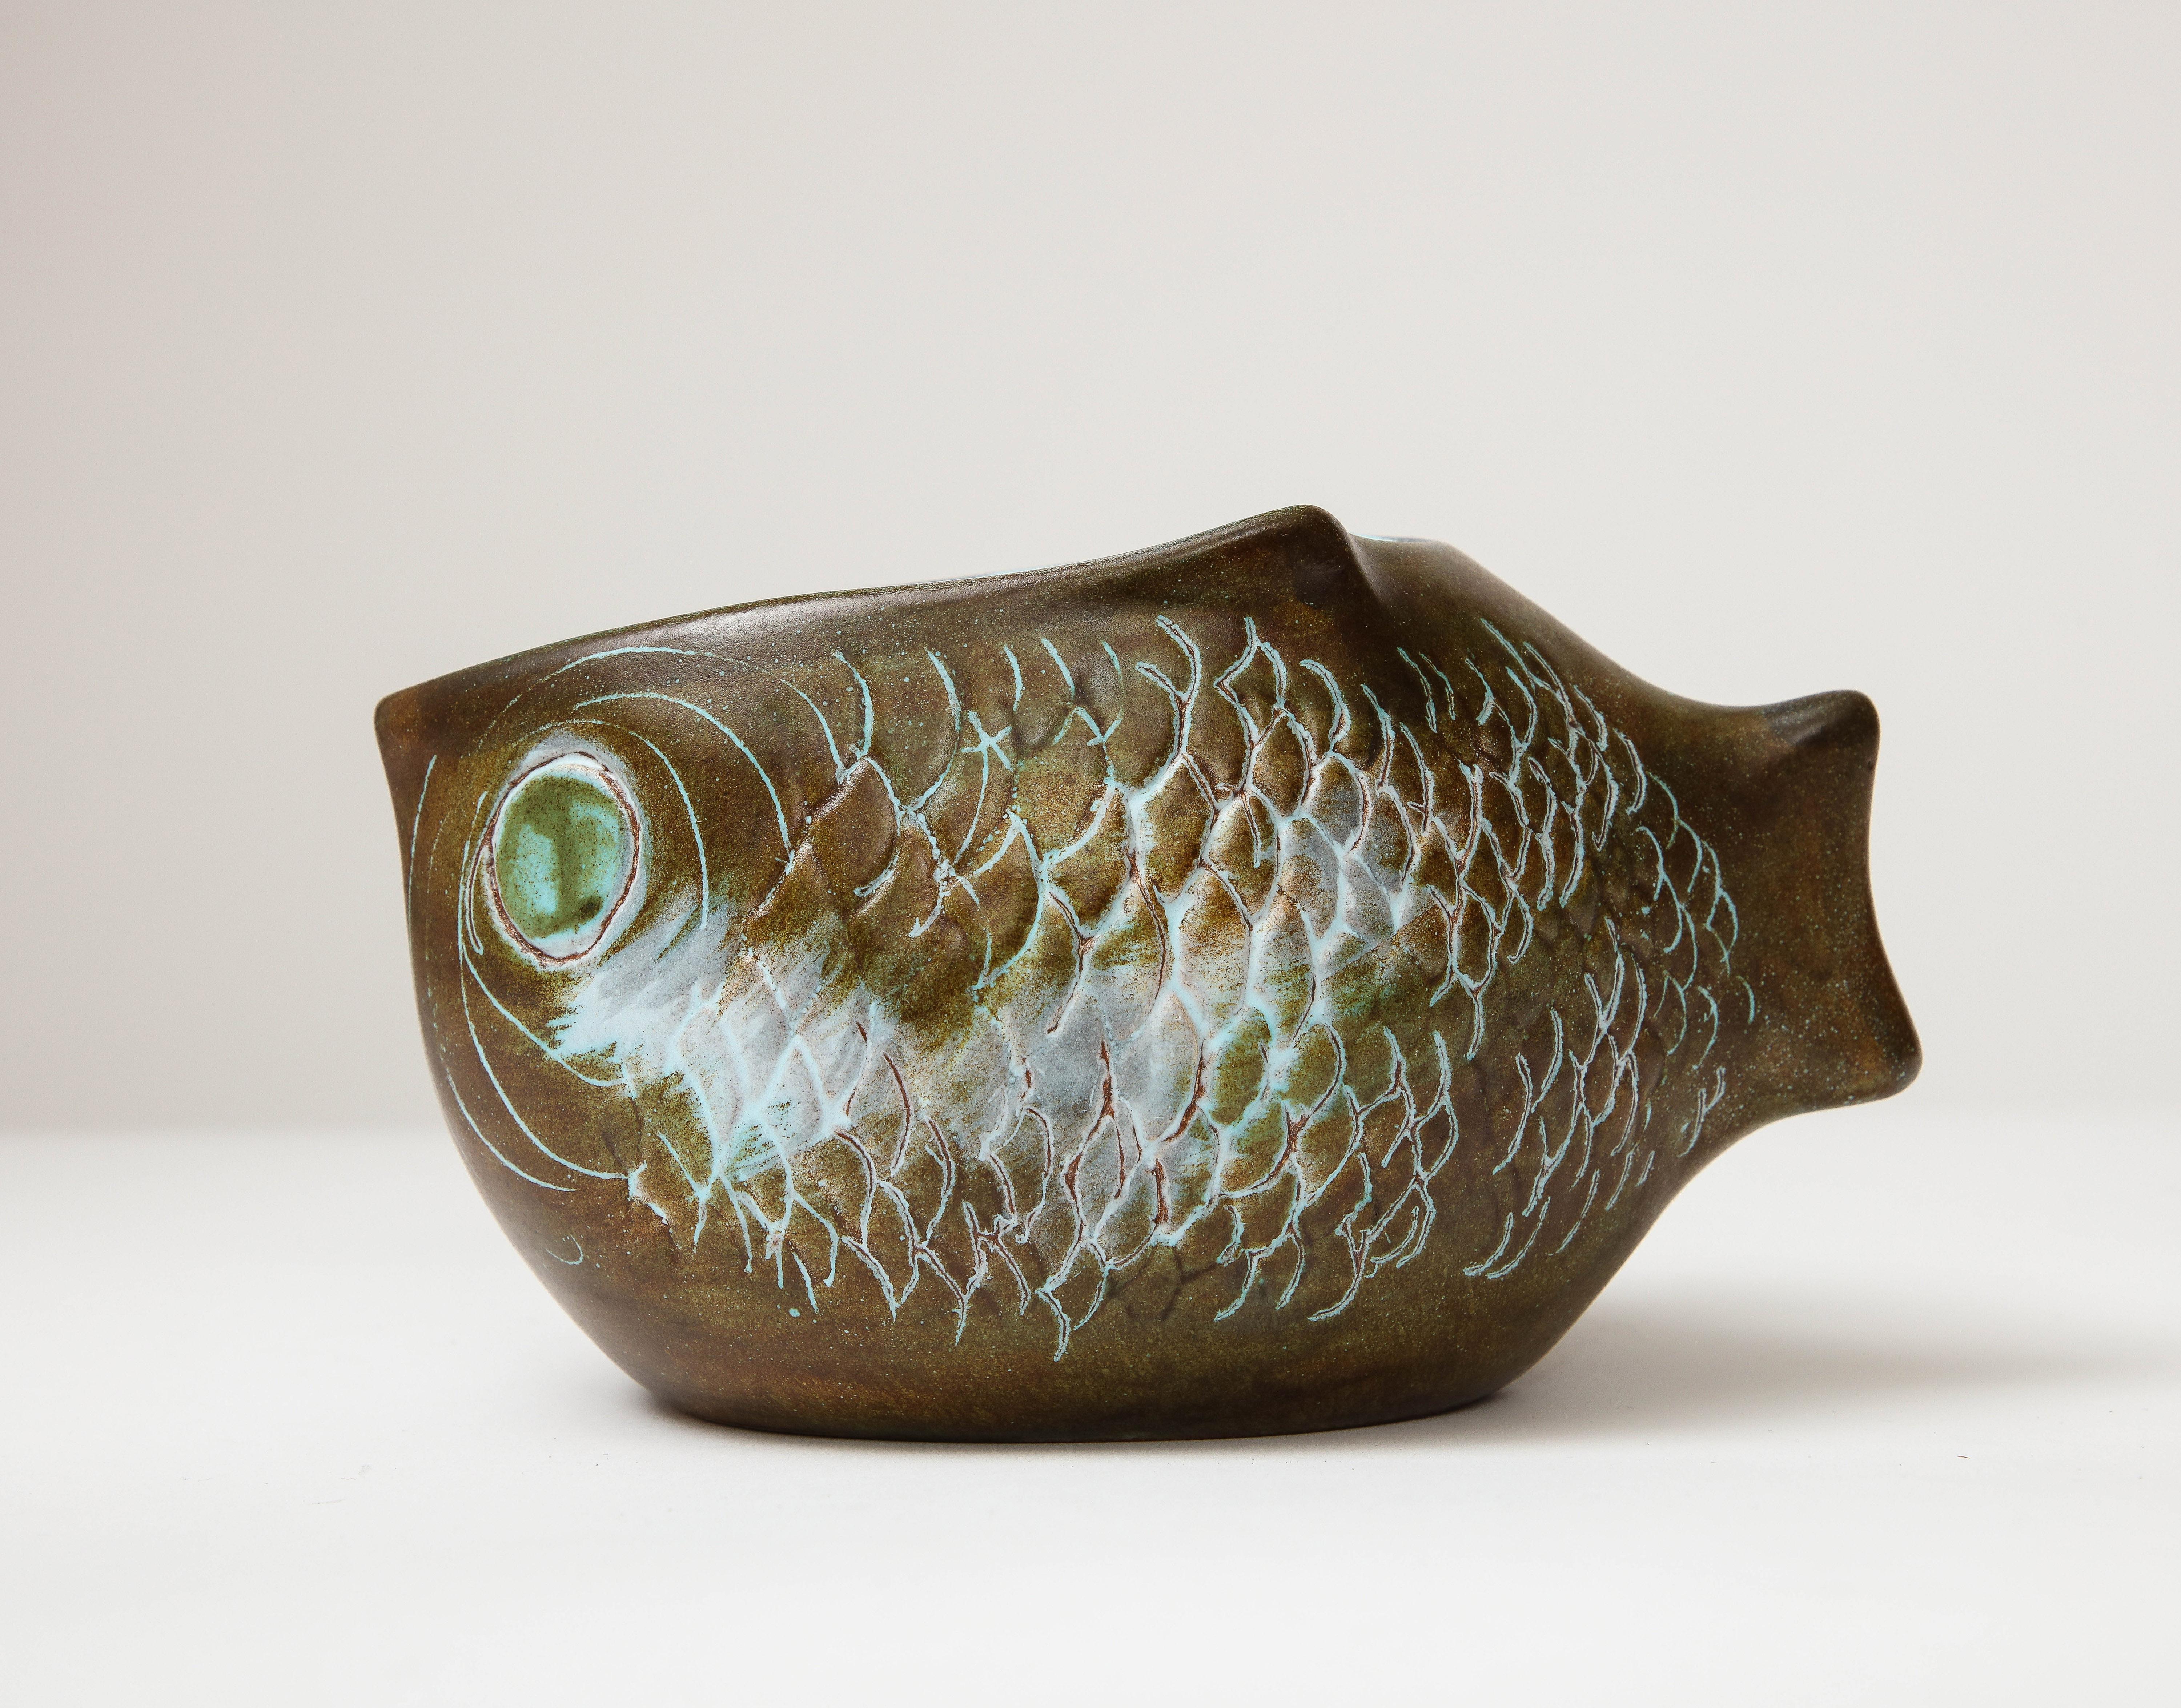 Glazed Ceramic Bowl in the Shape of a Fish, Guillot, c. 1960 For Sale 3